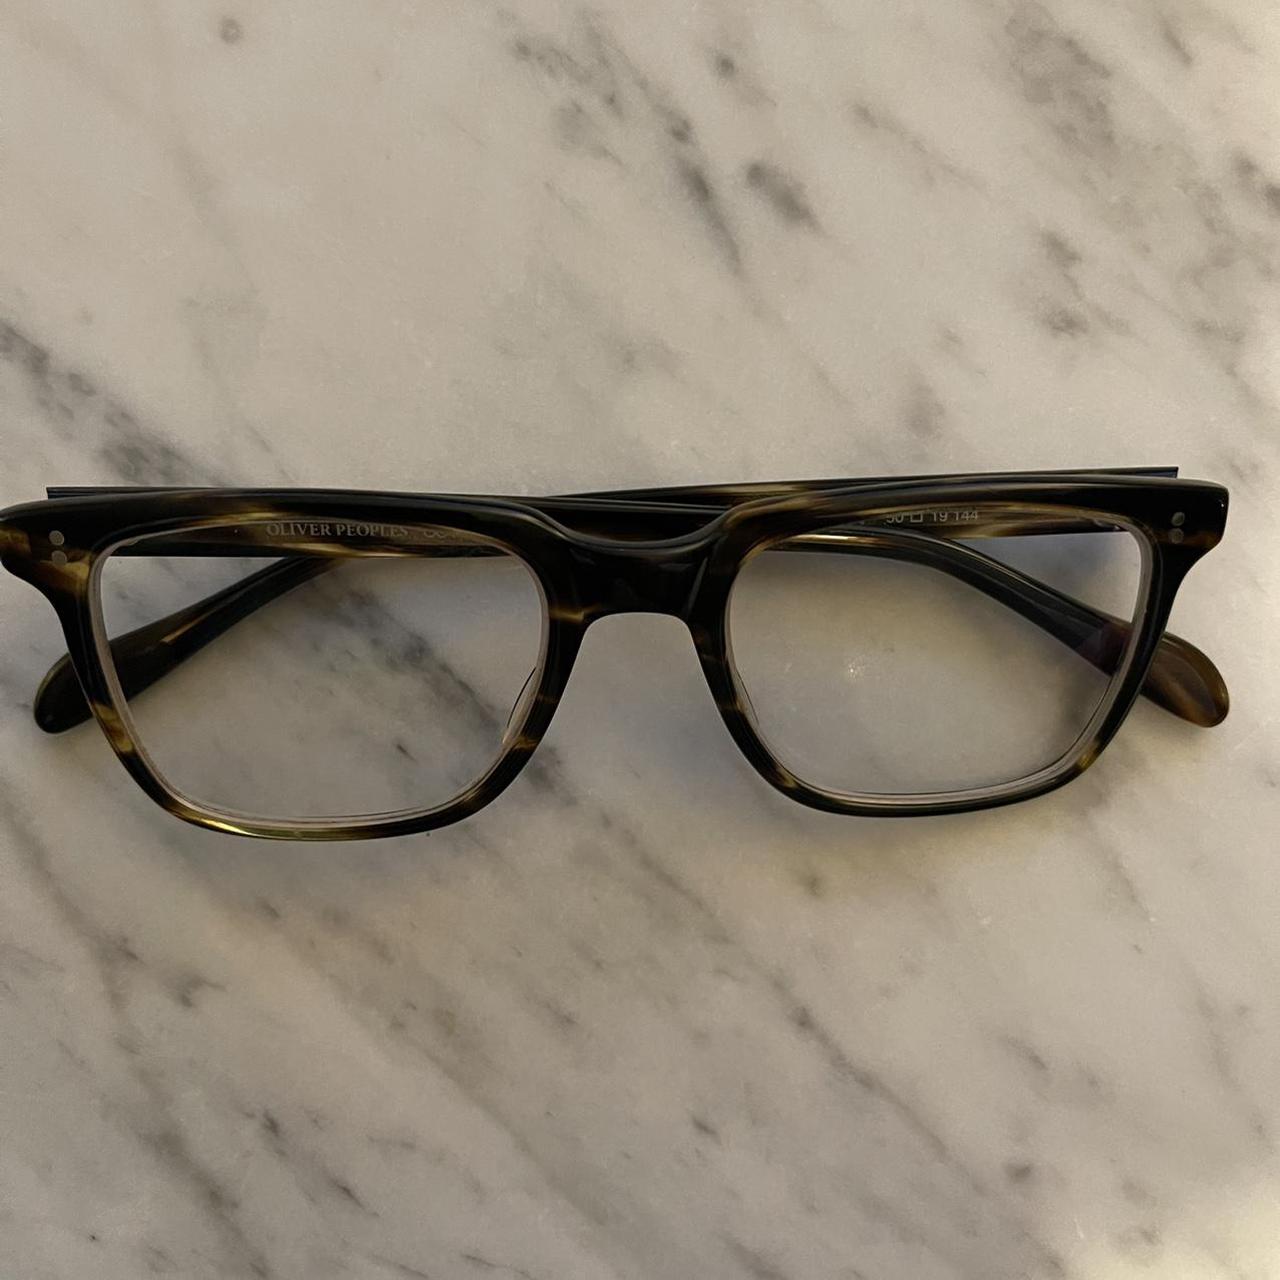 Product Image 1 - Oliver Peoples frames in tortoise